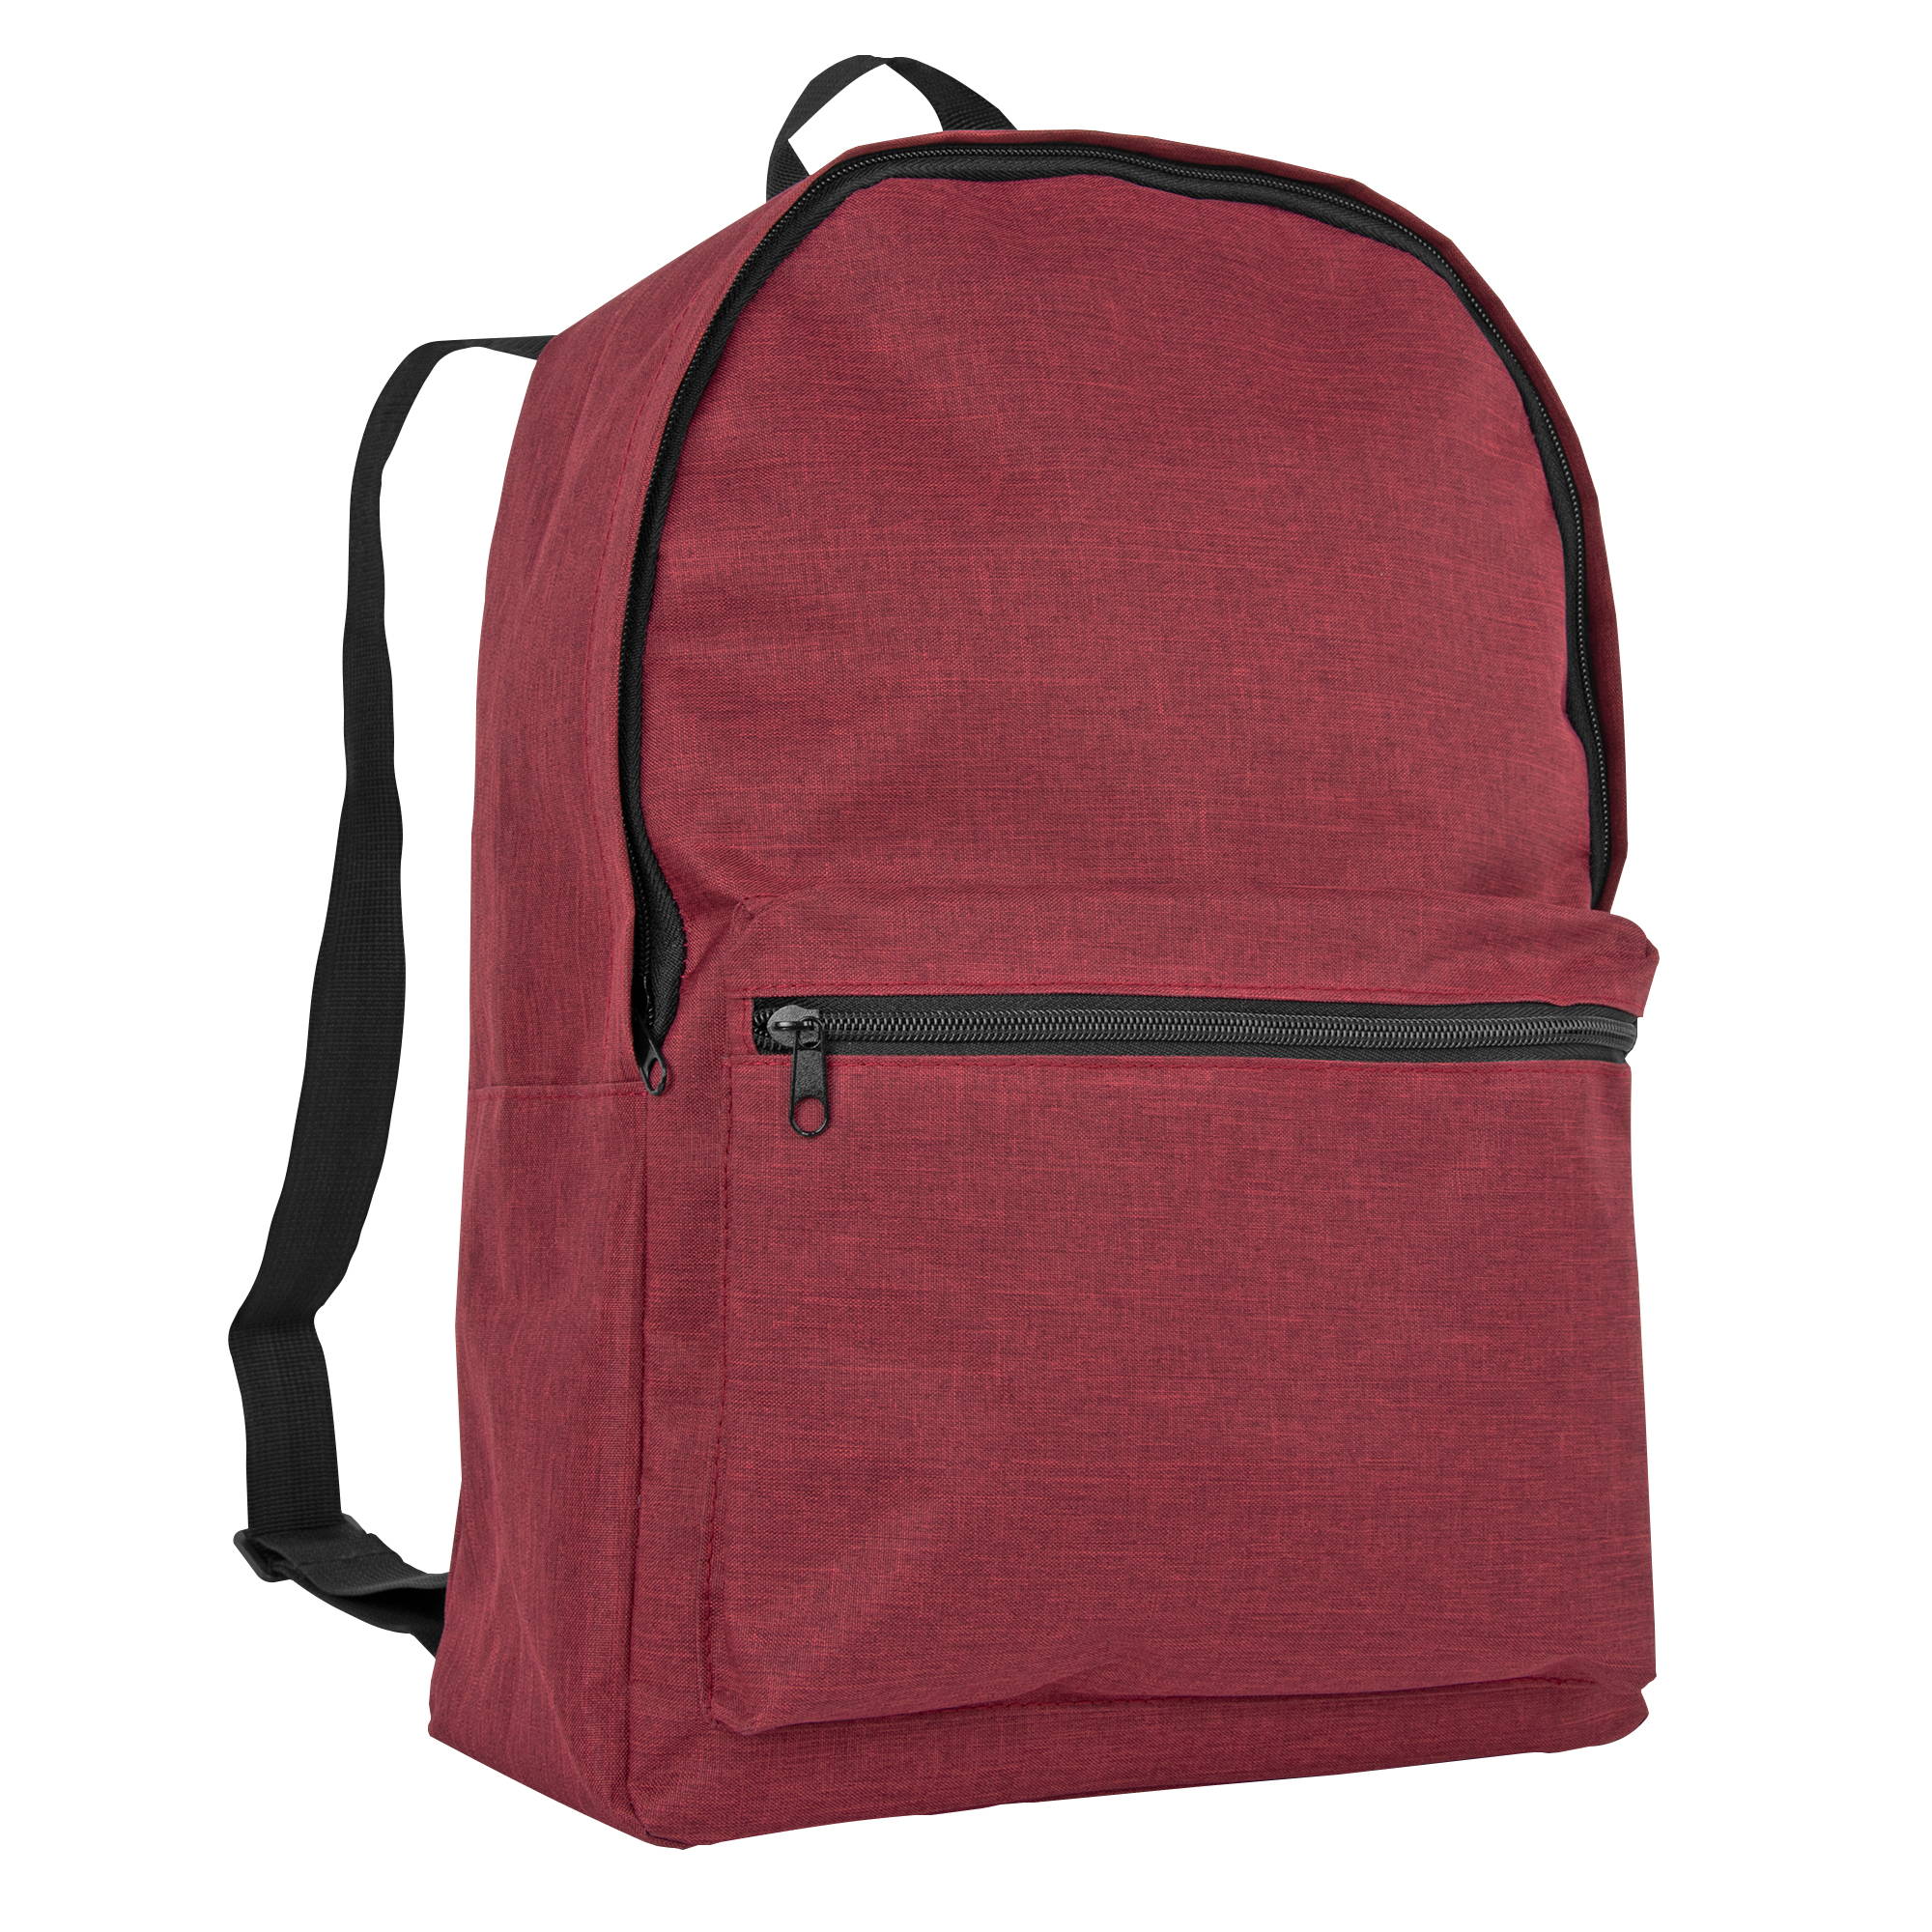 Casual Unisex Daypack Polyester Heather Grey Color Backpack for Travel School College Outdoor